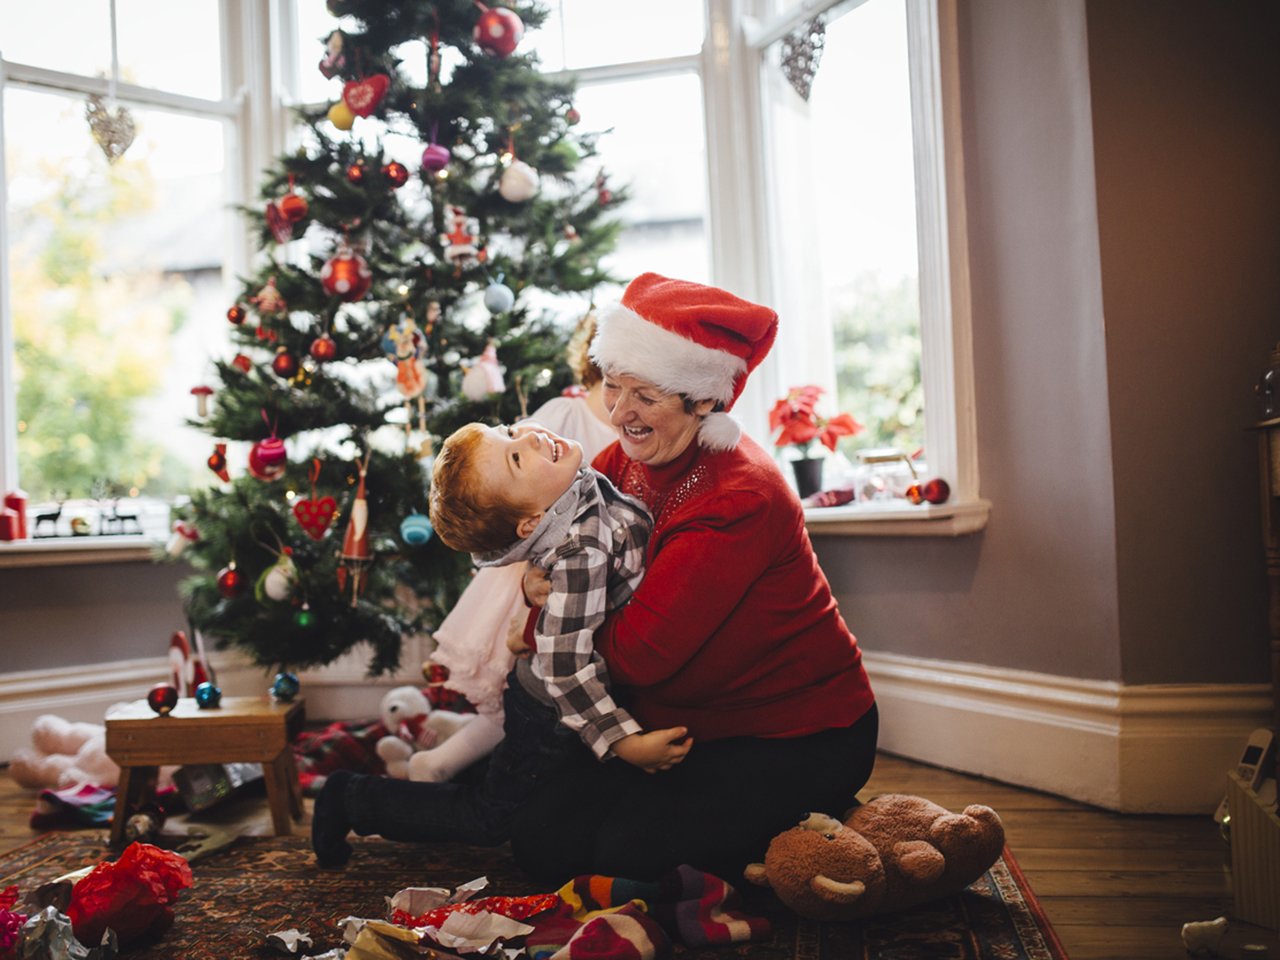 A grandmother wearing a santa hat and her grandson are celebrating Christmas morning together. The elderly woman is sitting on the floor with the little boy and holding him in a tight embrace as they play. A Christmas tree can be seen in the background and toys scattered around the floor